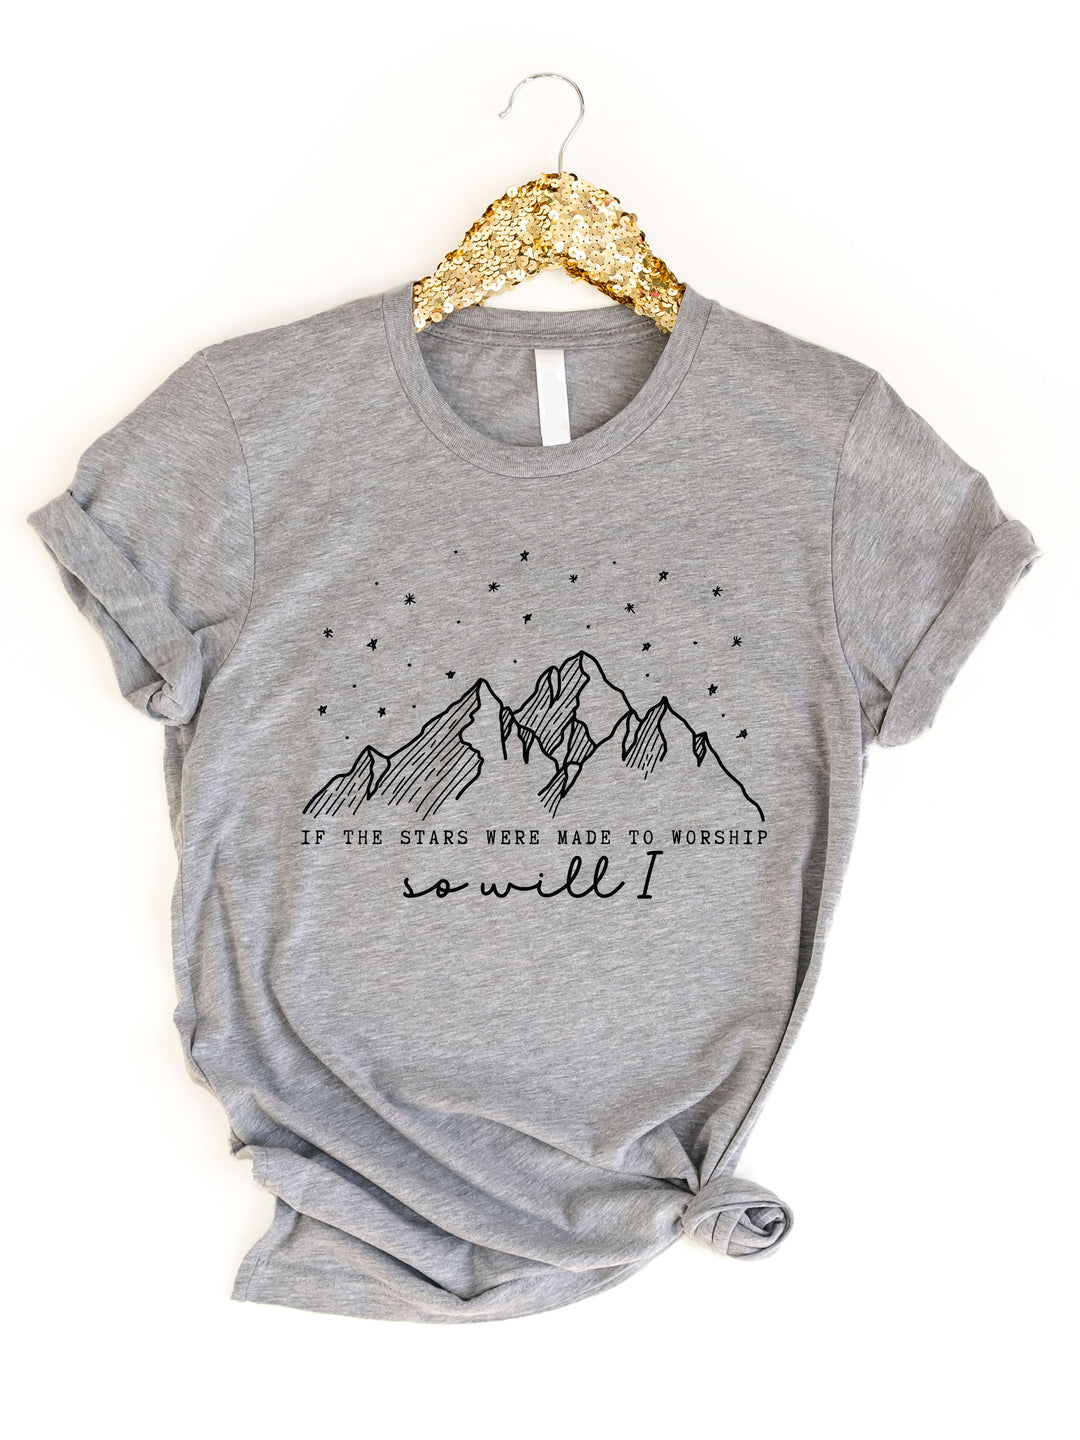 Stars were made to worship so will I Graphic Tee